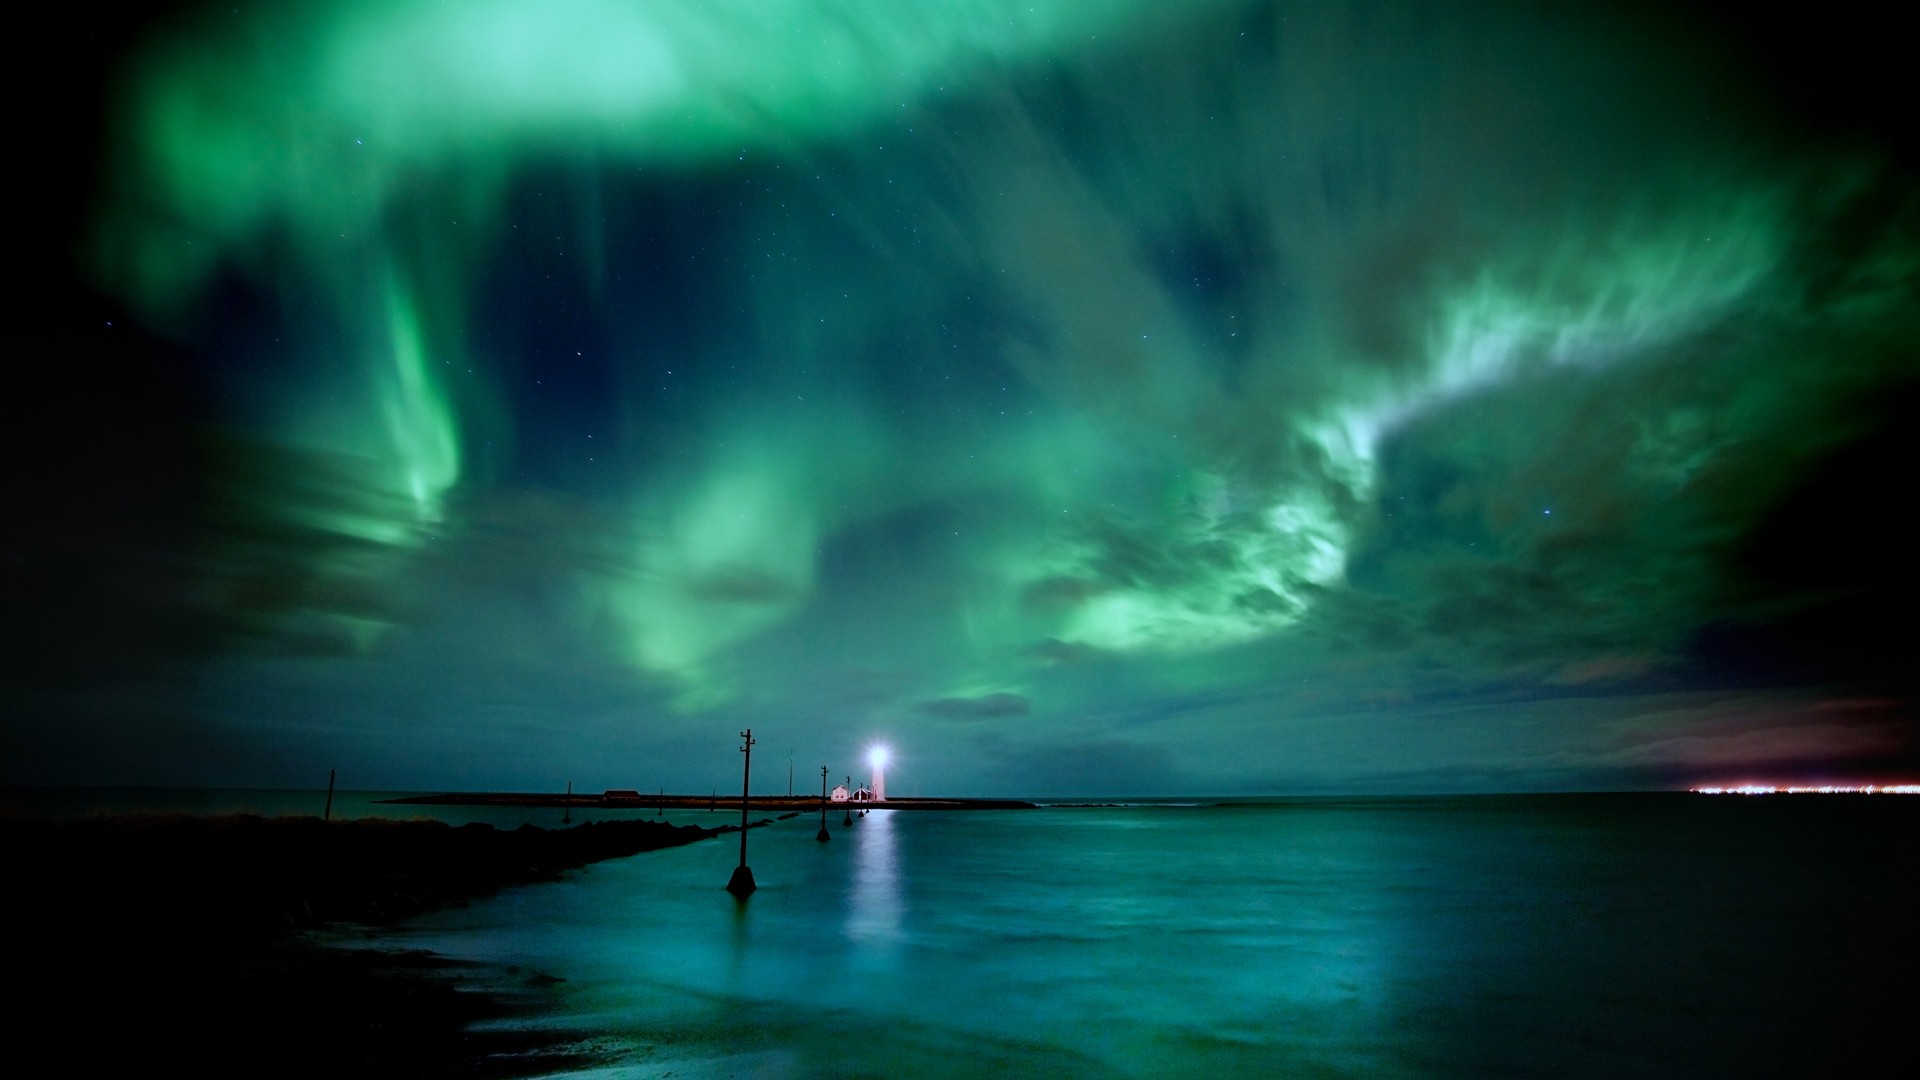 General 1920x1080 nature sky lighthouse aurorae nordic landscapes outdoors